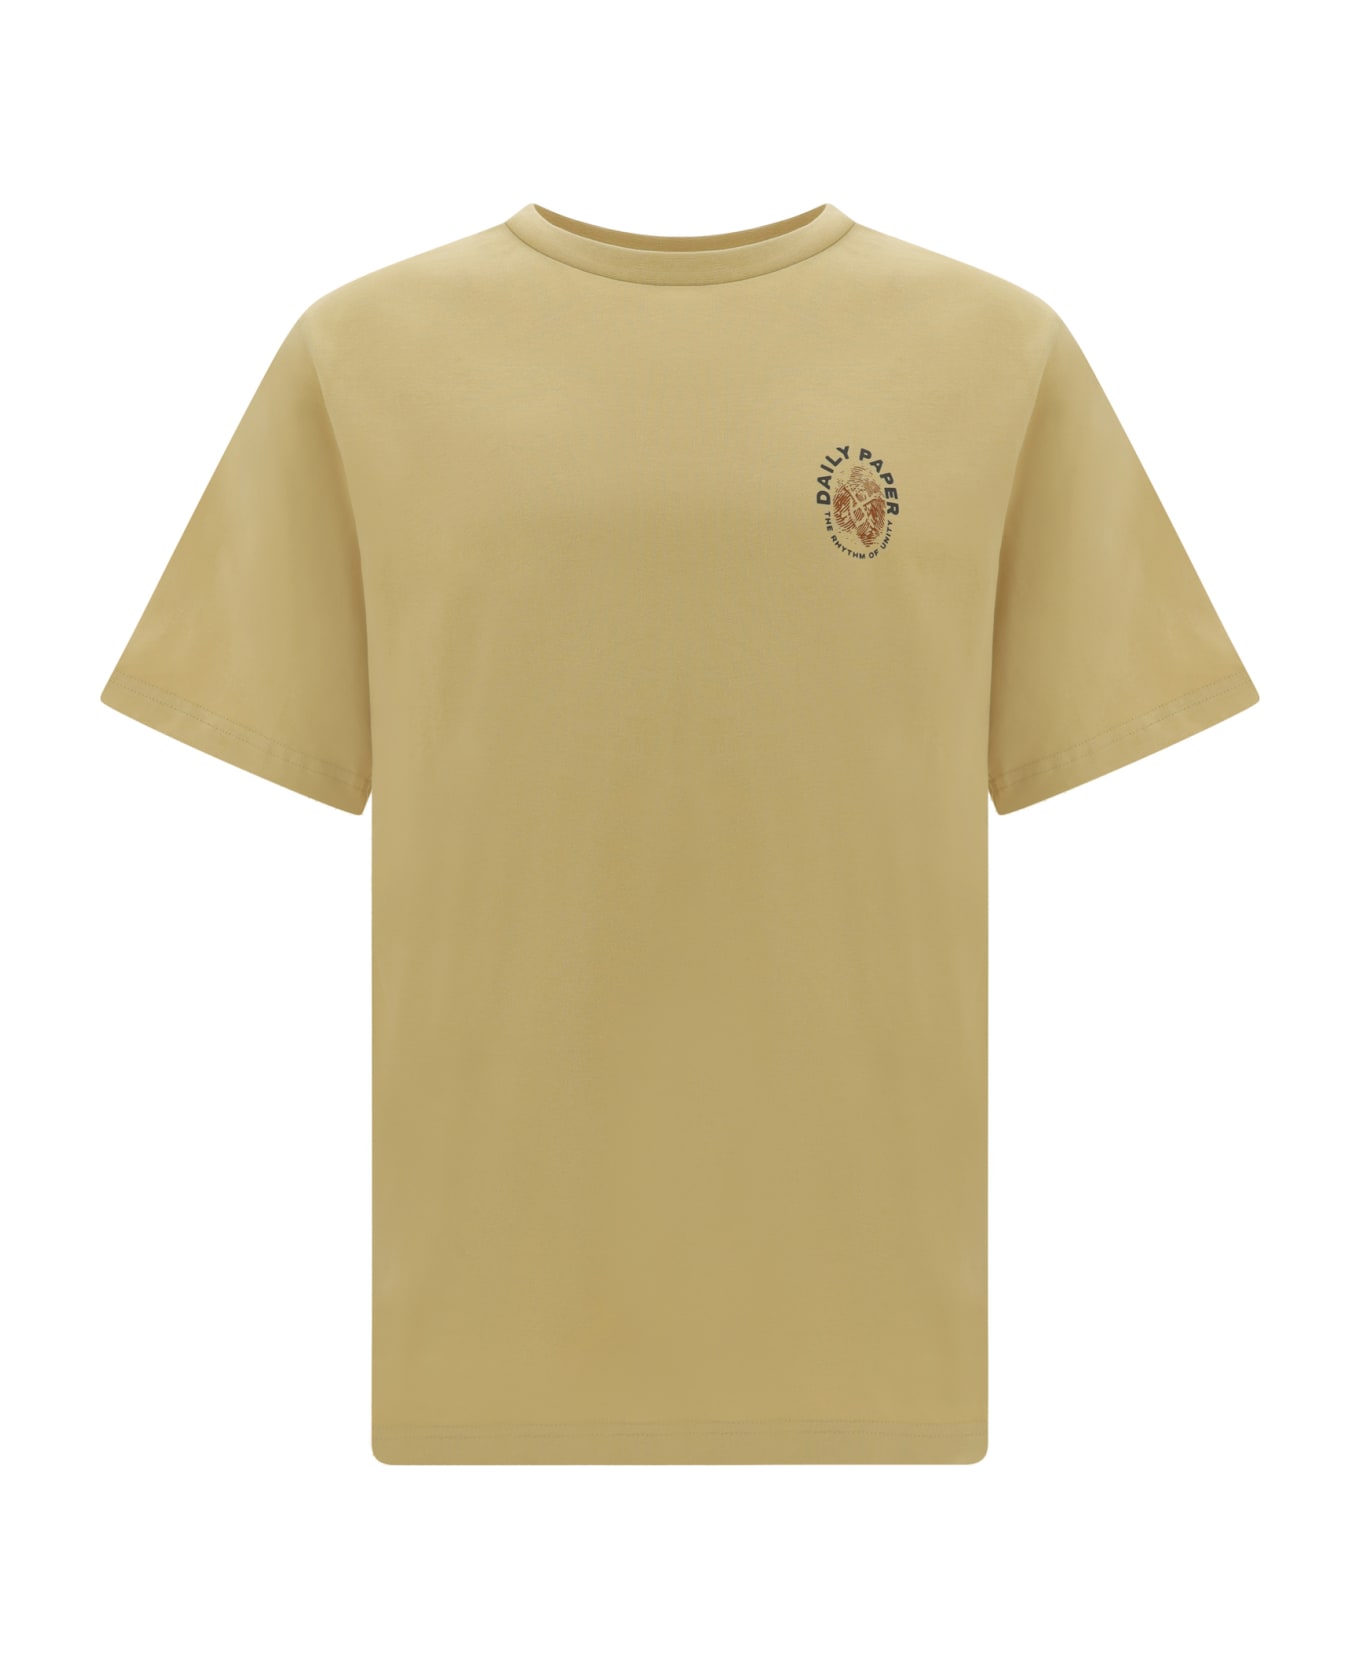 Daily Paper Identity T-shirt - Taos Beige